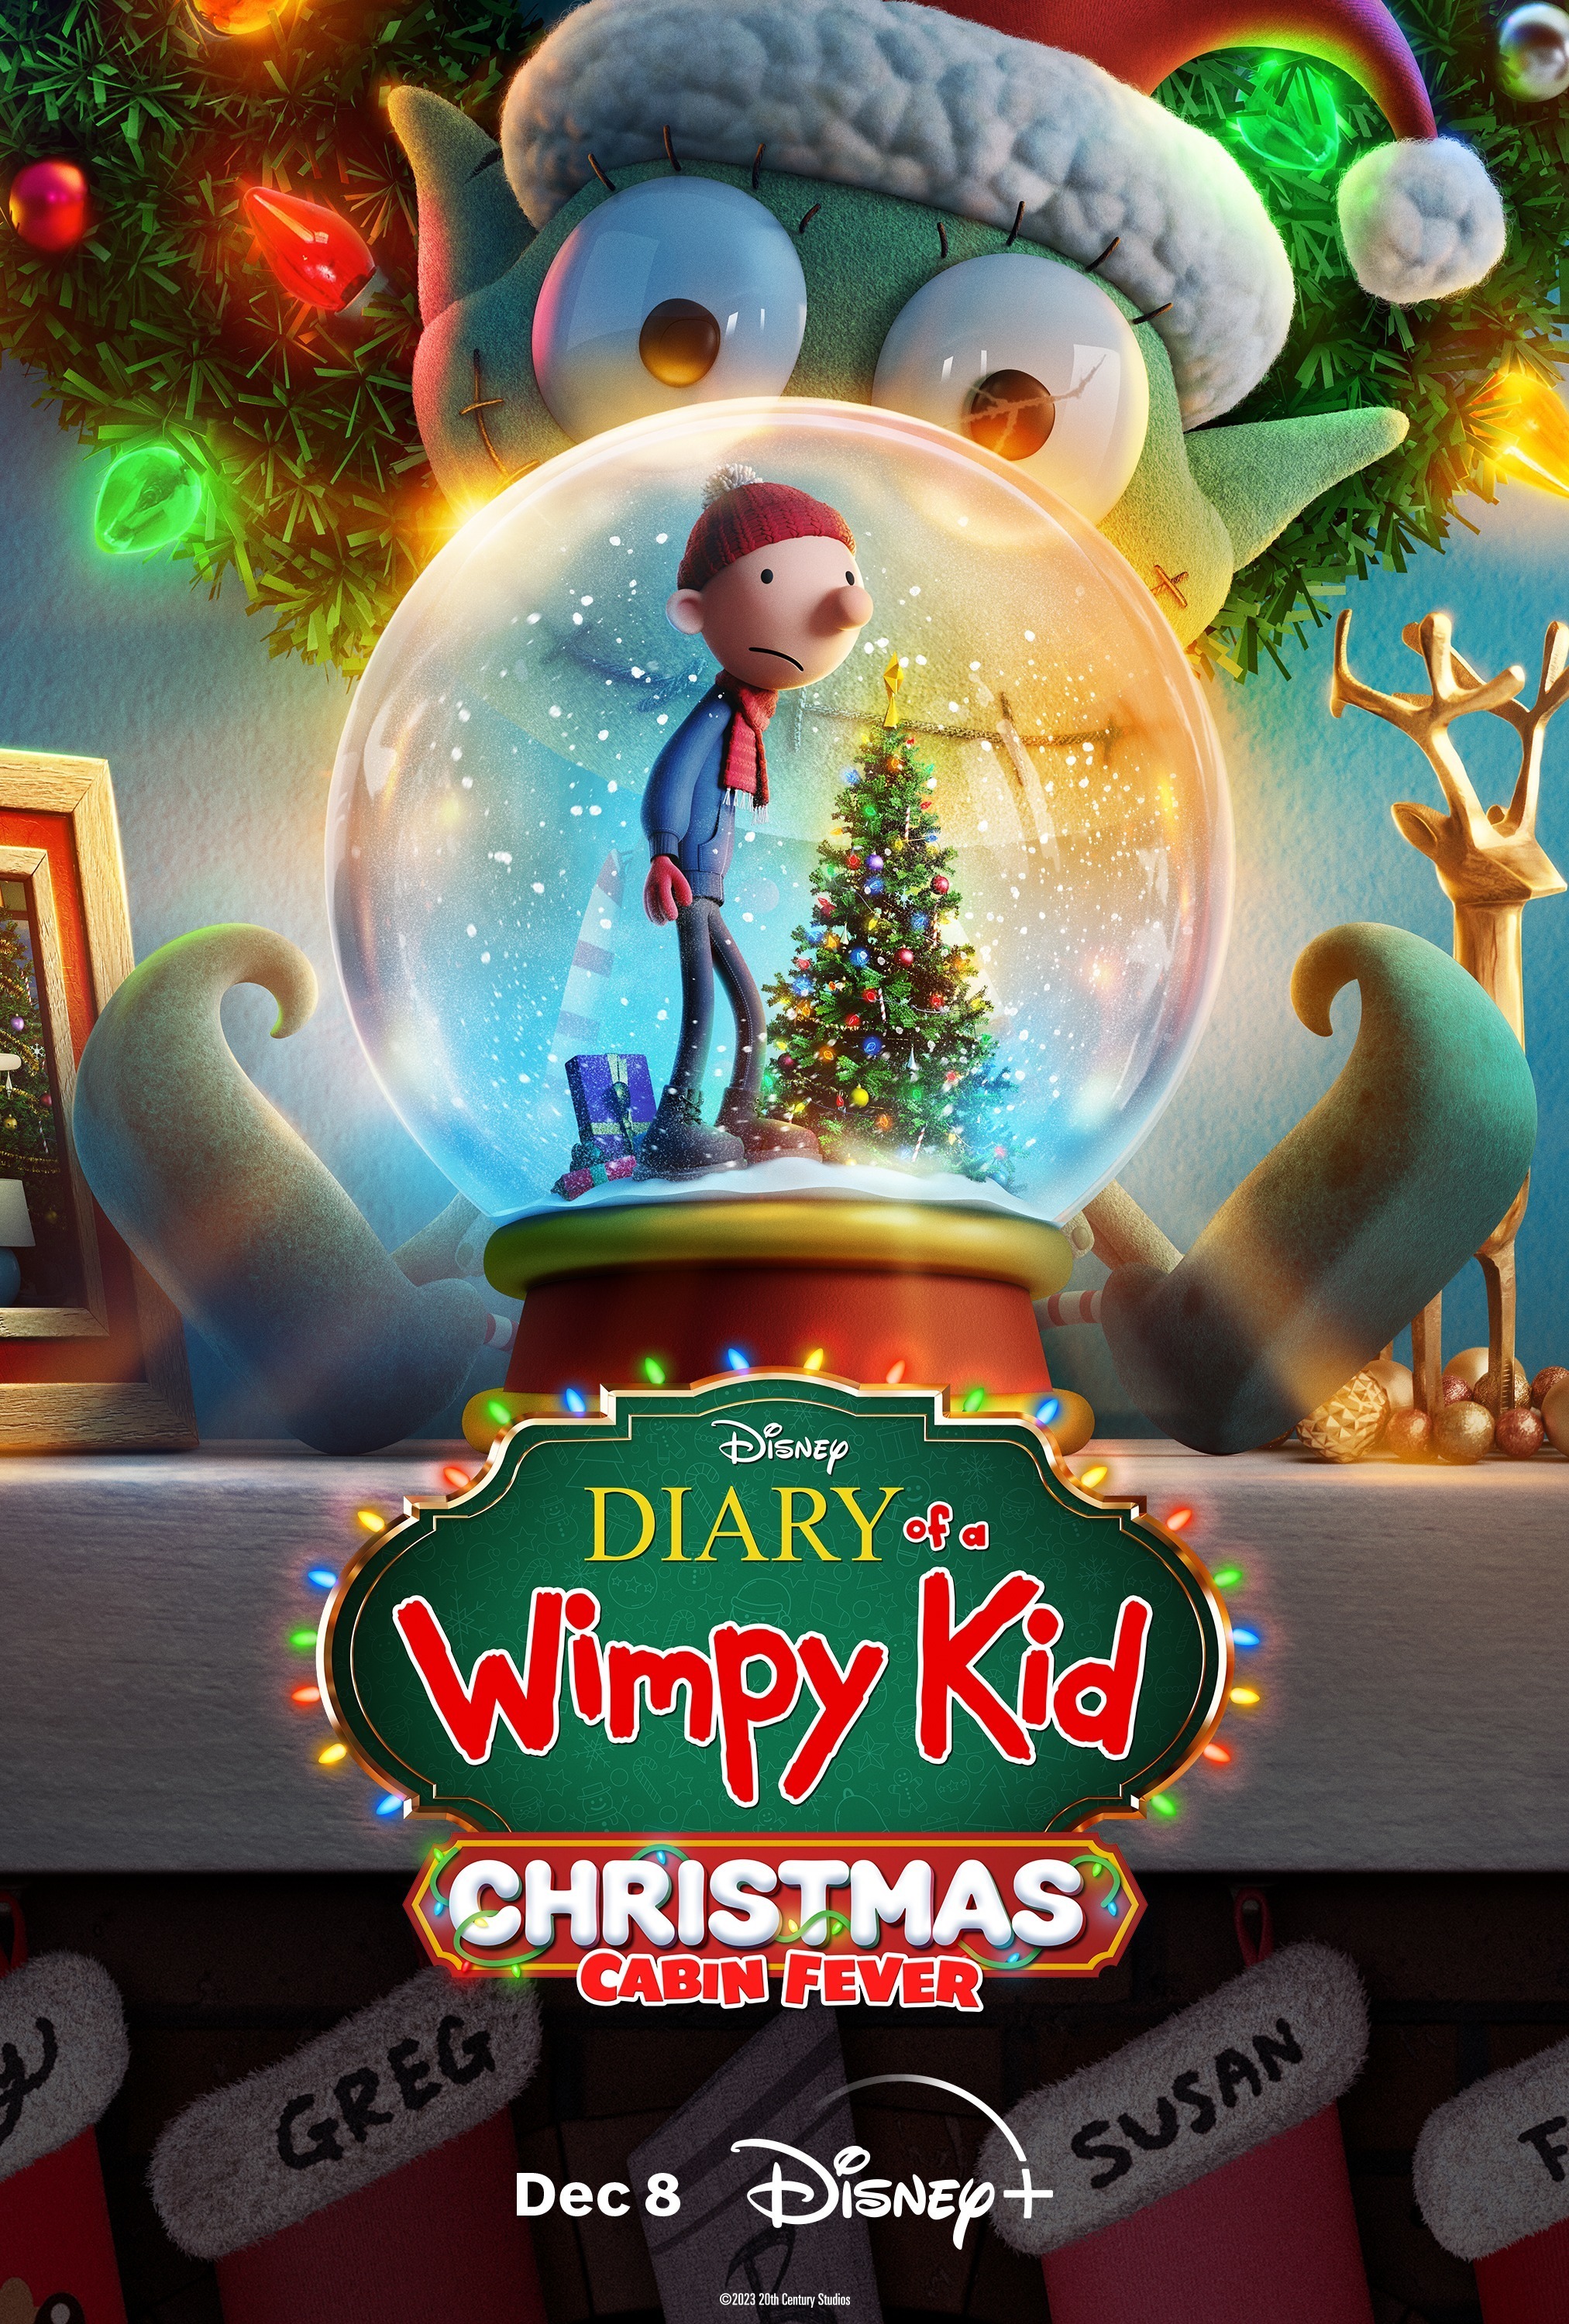 Mega Sized Movie Poster Image for Diary of a Wimpy Kid Christmas: Cabin Fever (#3 of 4)